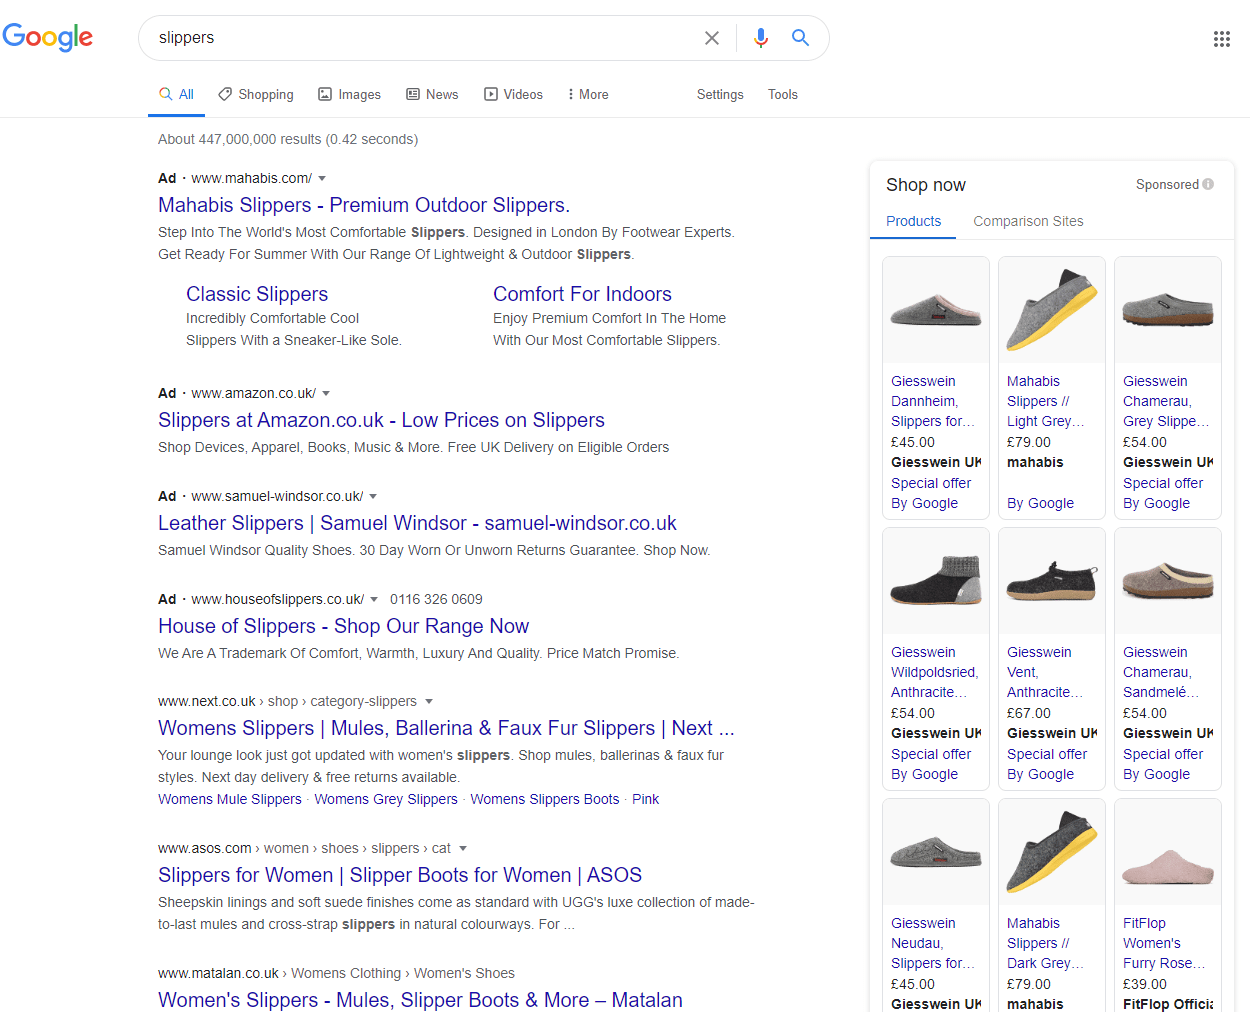 search results showing product ads and ecommerce product and category pages